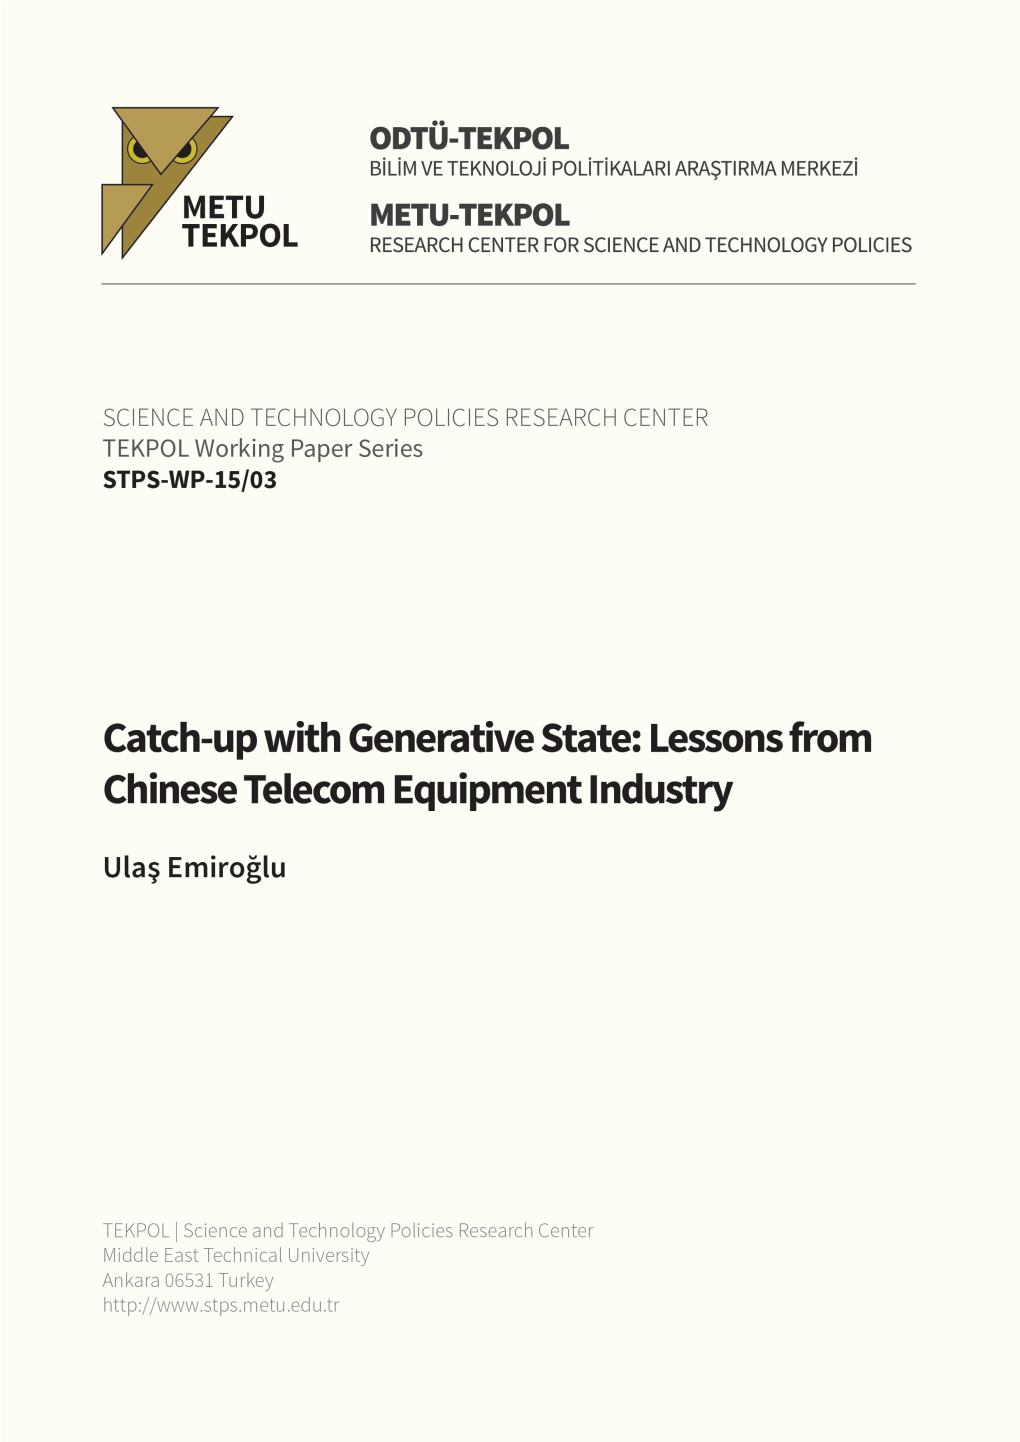 Catch-Up with Generative State: Lessons from Chinese Telecom Equipment Industry